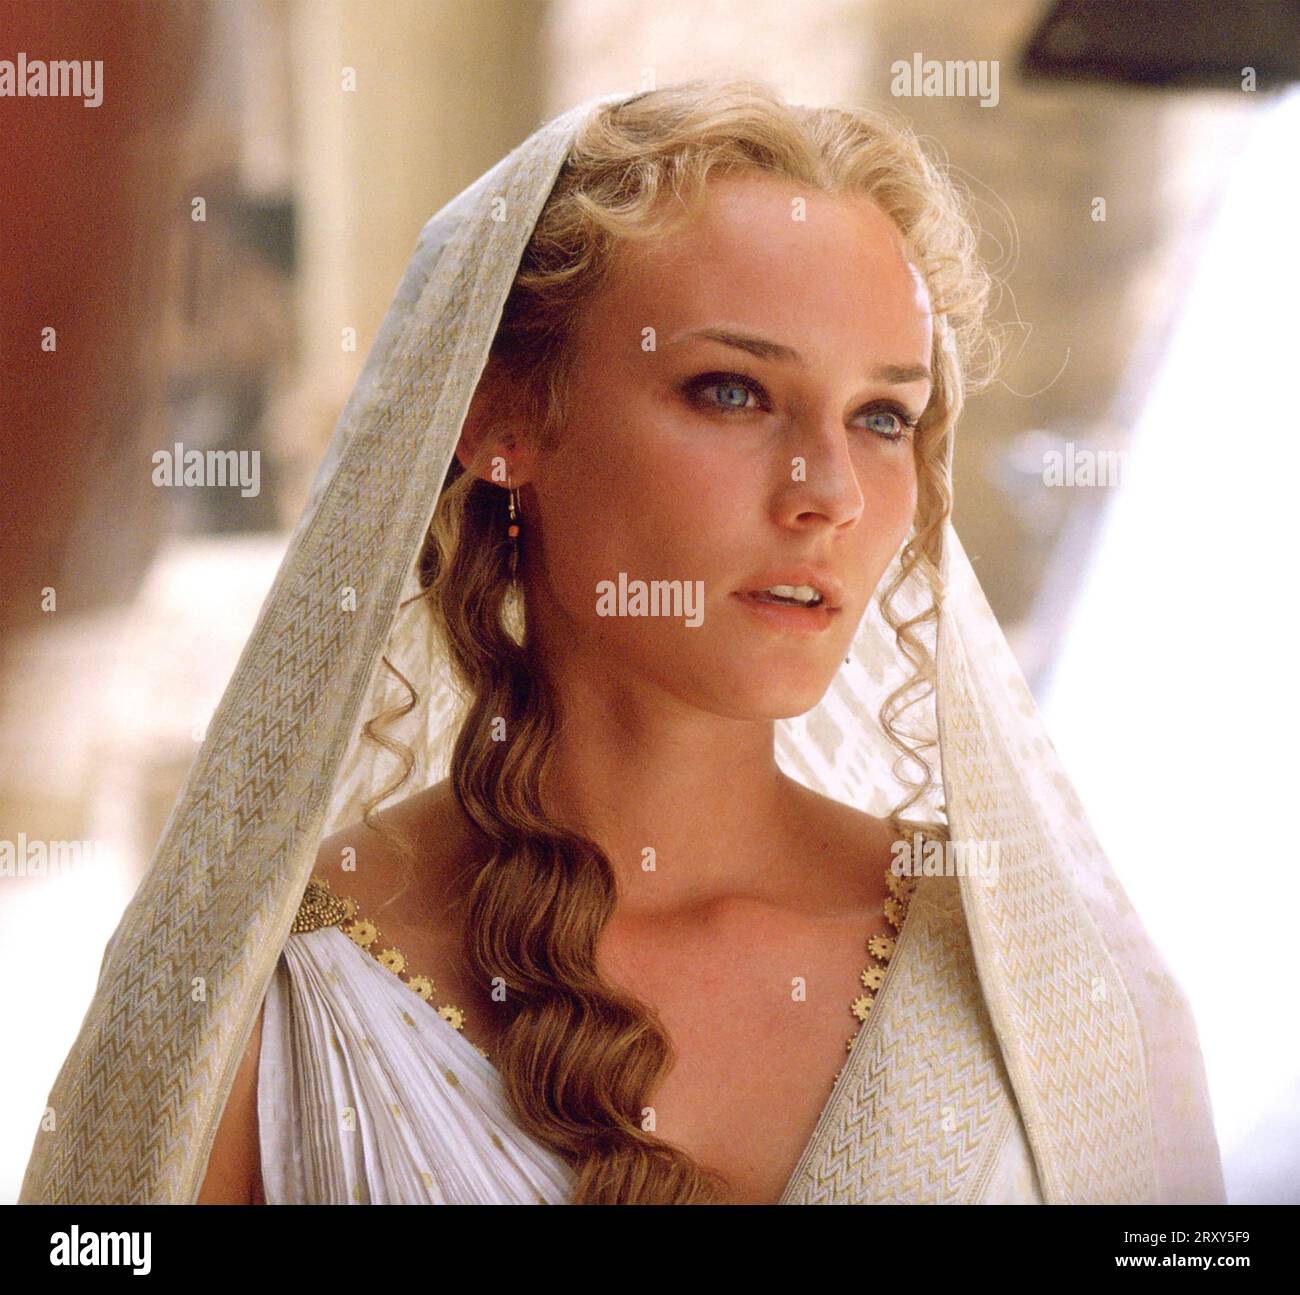 TROY 2004 Warner Bros. Pictures film with Diane Kruger as Helen Stock Photo